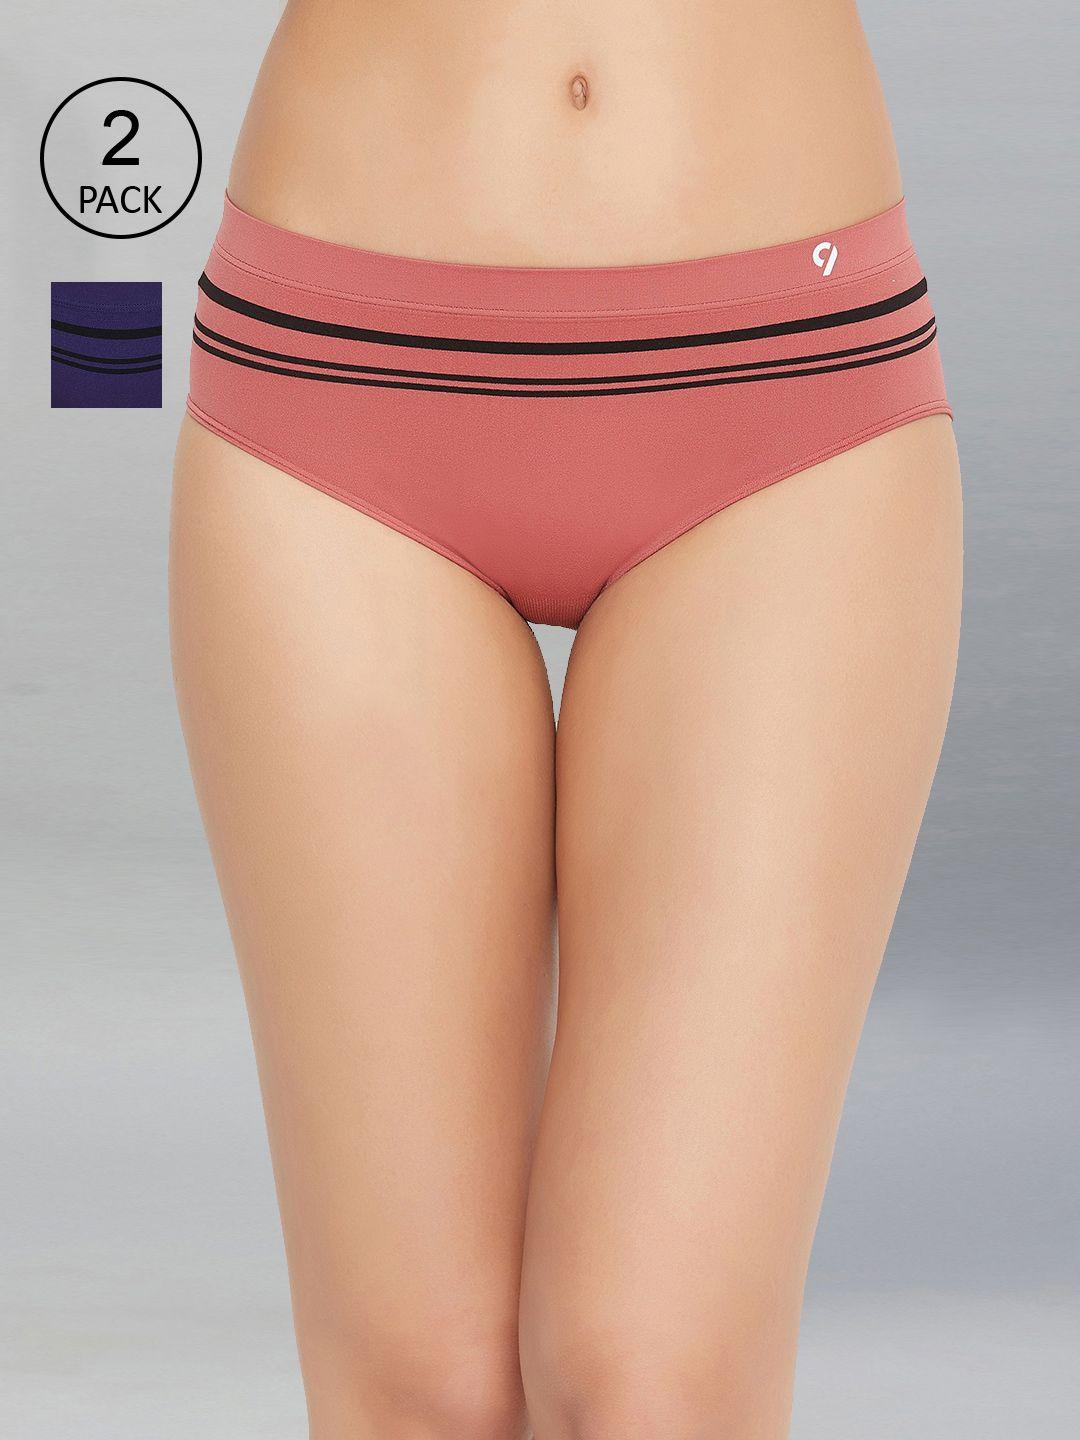 c9 airwear women pack of 2 assorted striped briefs p1182_cdr_nvy